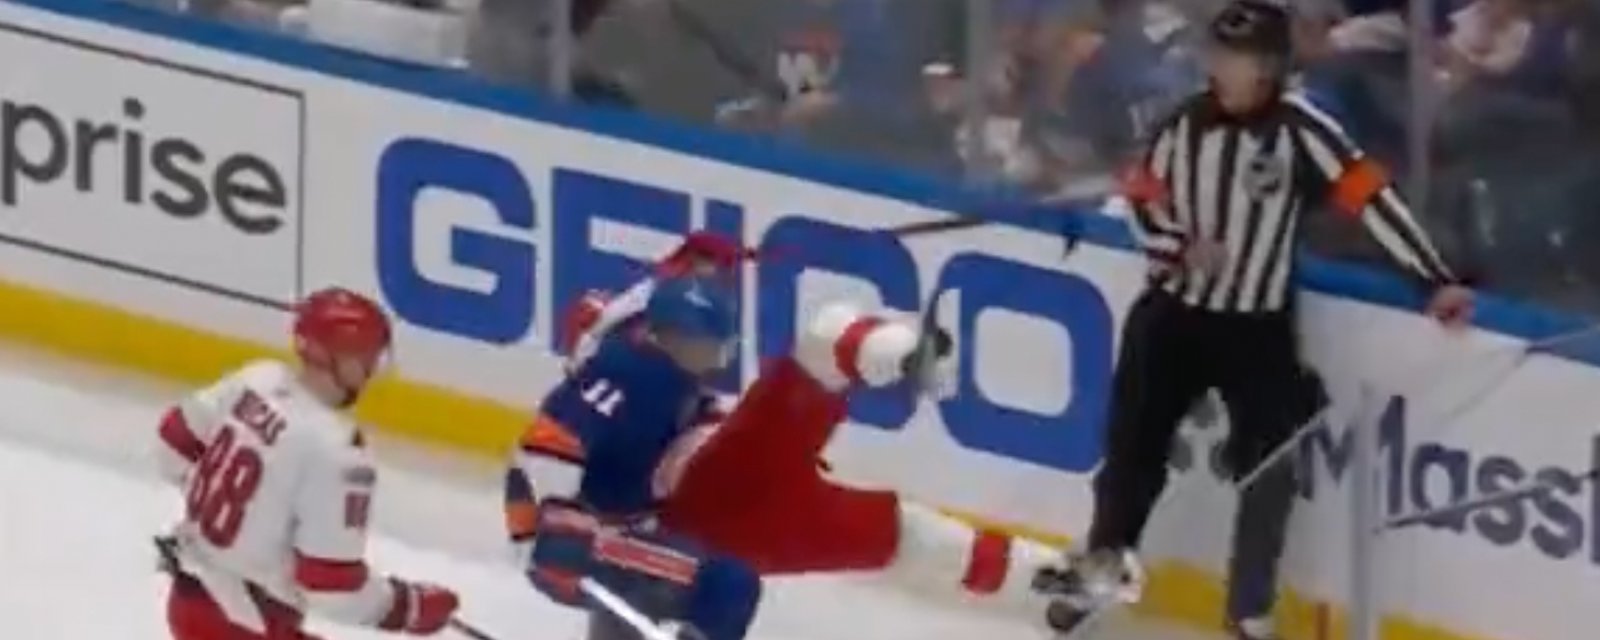 Referee TJ Luxmore takes flying skate to the leg in scary scene in New York